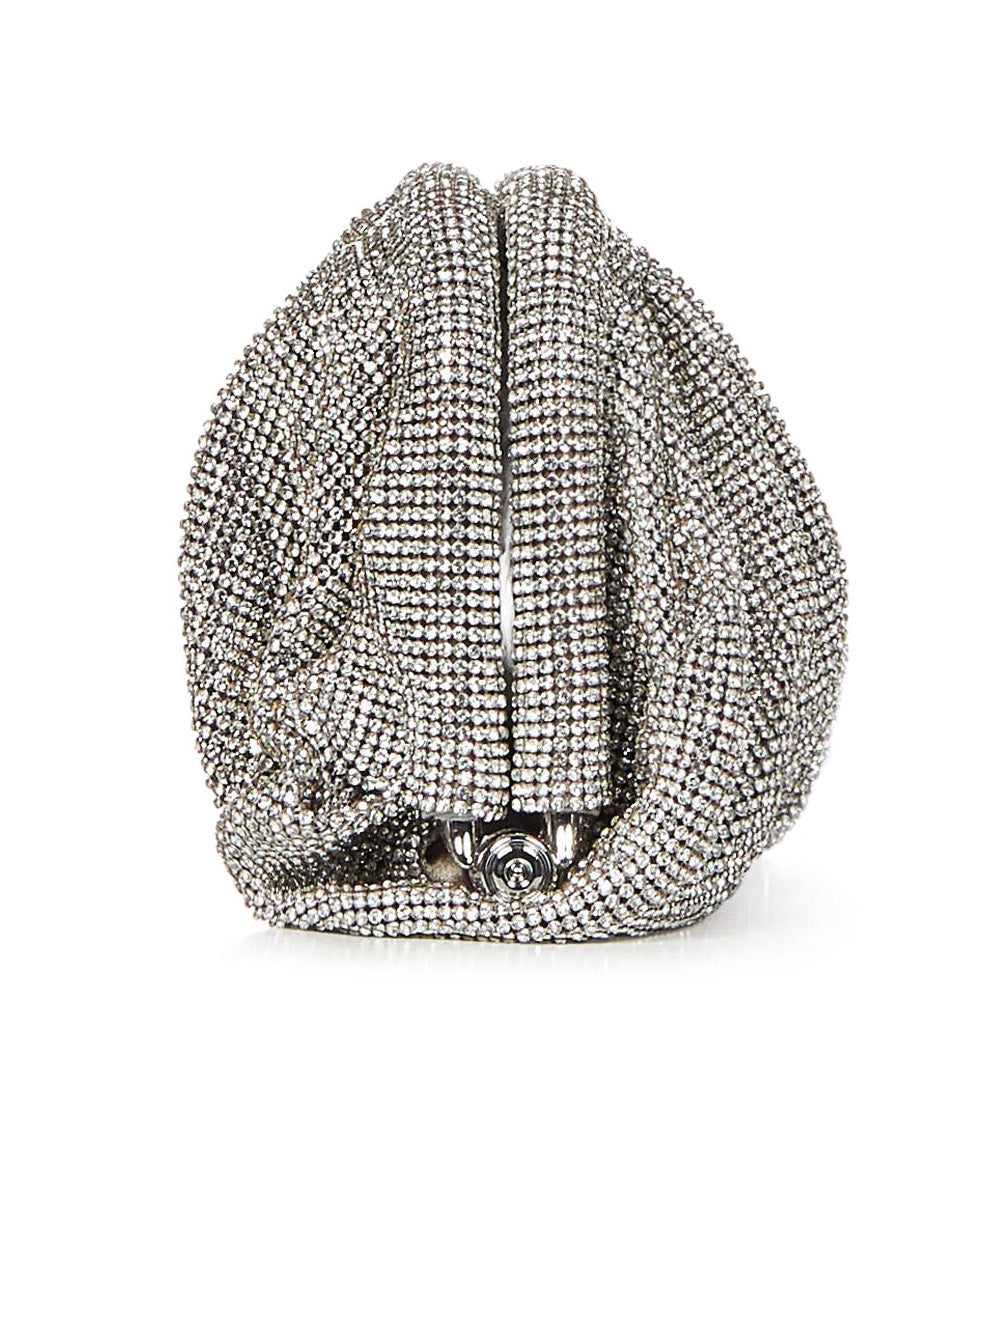 Soft pleated crystal clutch in silver